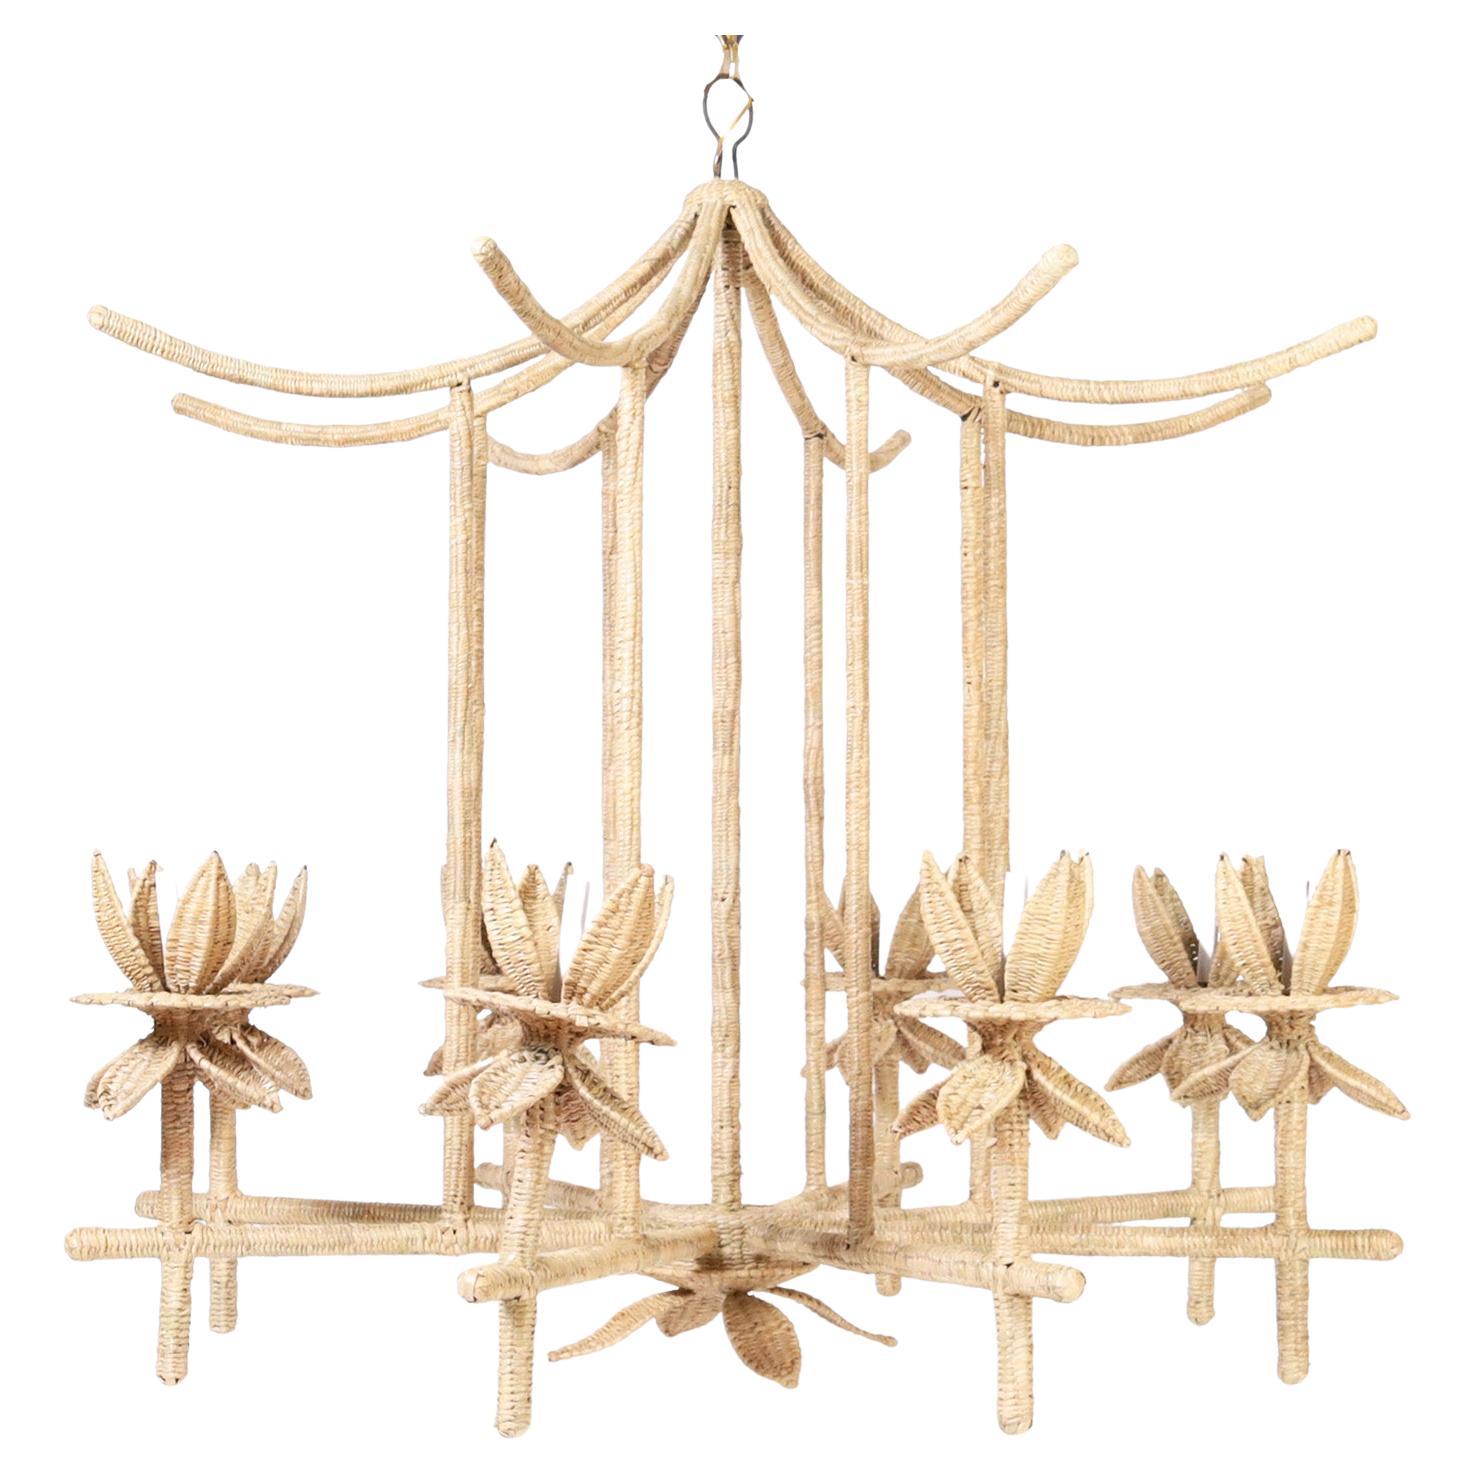 Seychelles Woven Reed Pagoda Form Chandelier from the FS Flores Collection For Sale